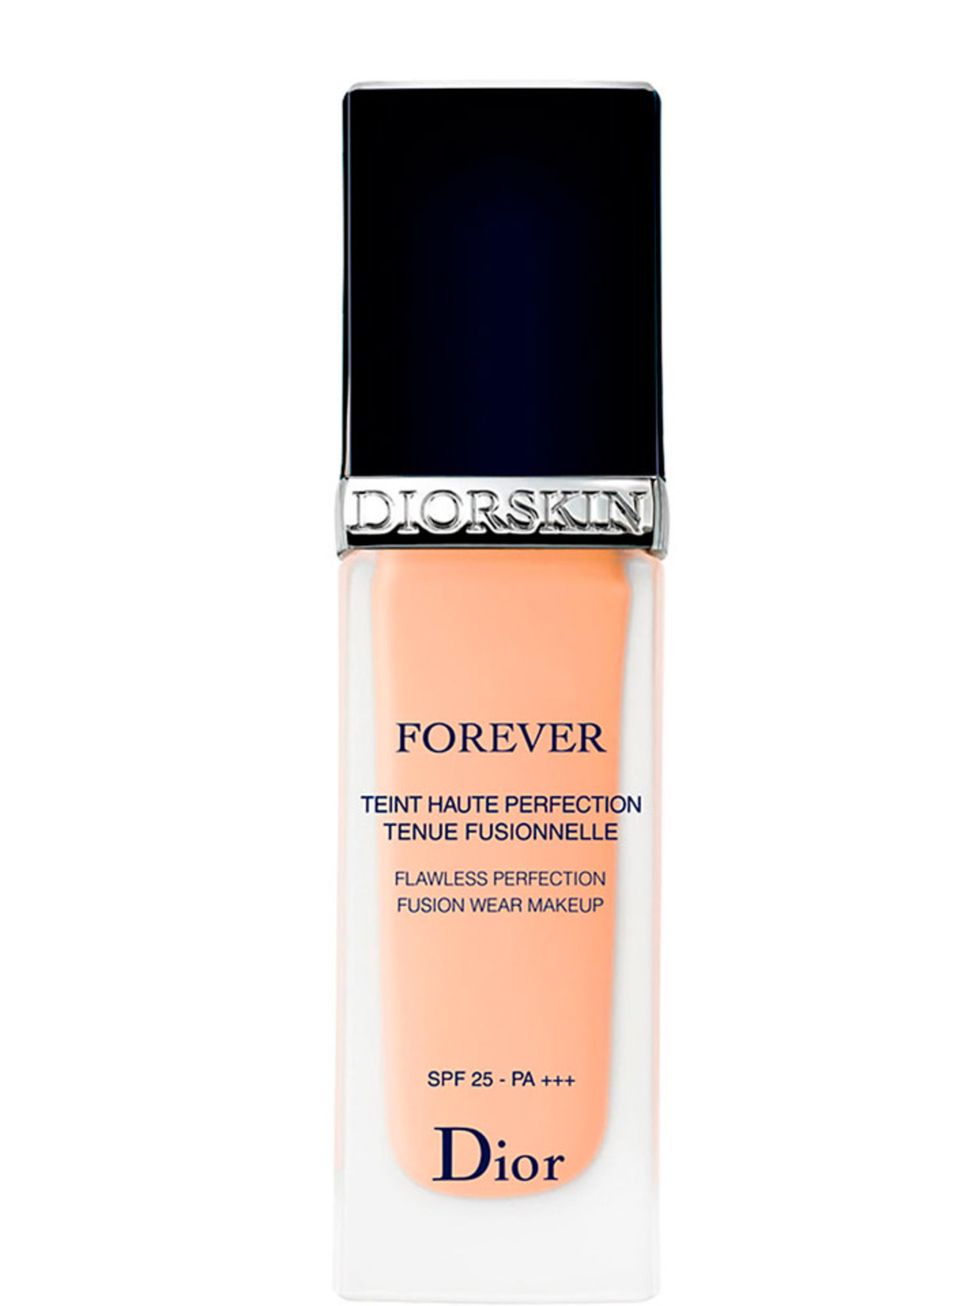 You want your complexion to look real, but perfected. Dior's Diorskin Forever foundation, £32 is lightweight enough that it feels like real skin, but with enough pigment to even out your skintone.

Diorskin Forever Flawless Perfection Fusion Wear Makeup S